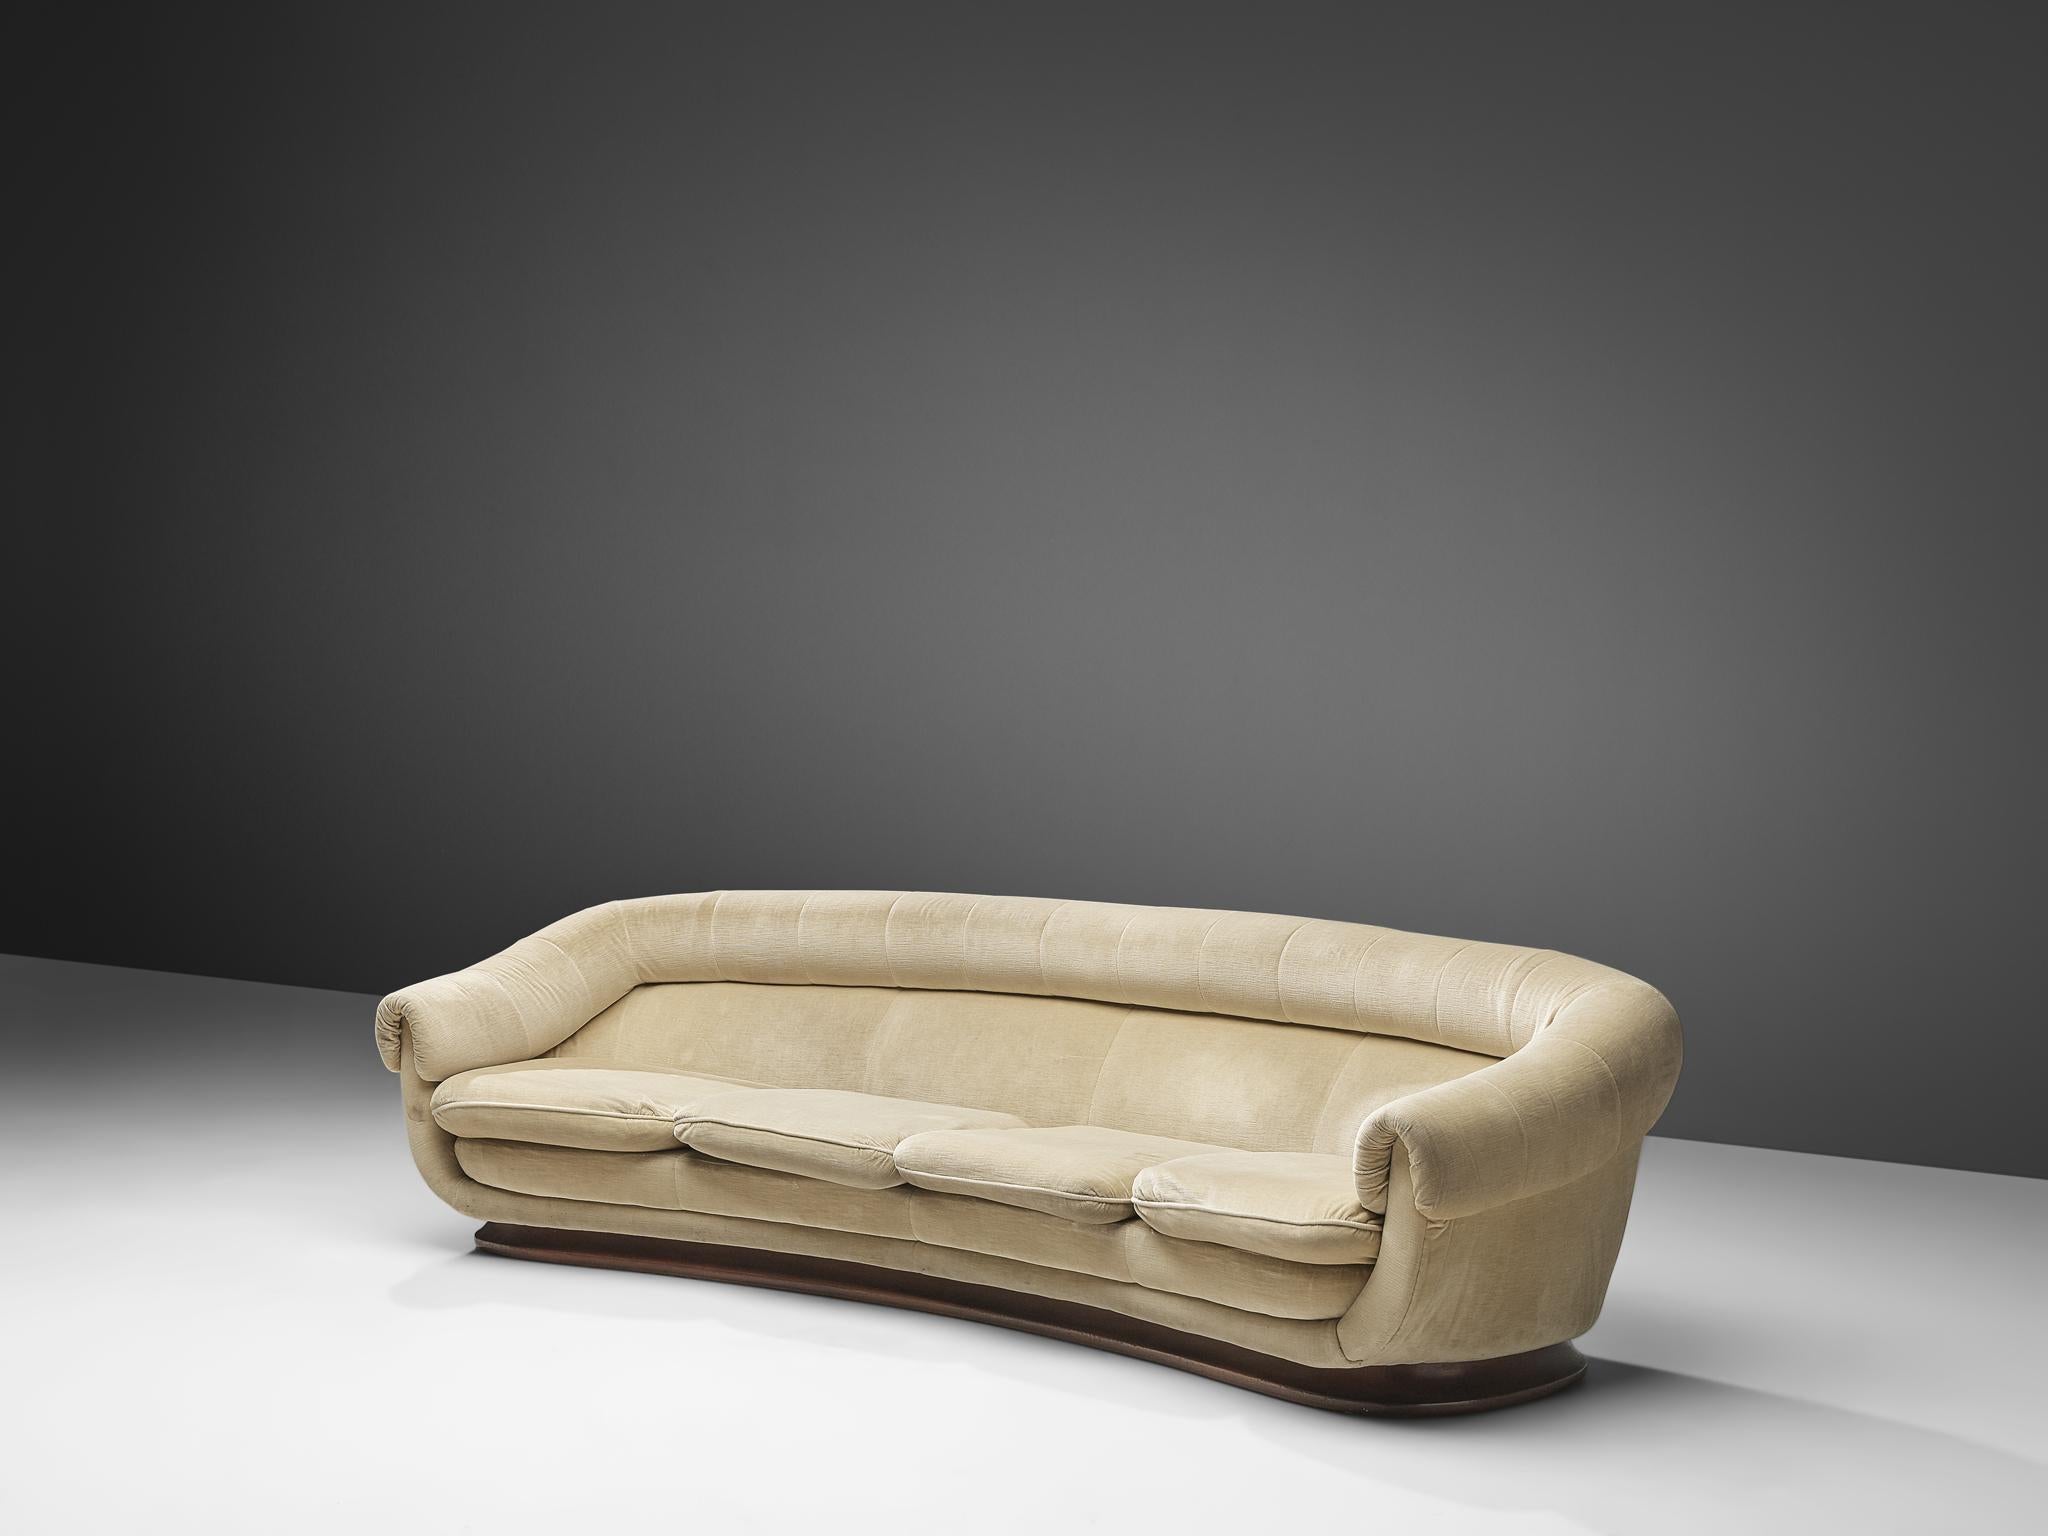 Italian four-seat sofa, fabric and wood, Italy, 1950s.

An Italian voluptuous and bold sofa that shows a play of volumes with soft, fluid and rounded lines. The large sofa features a thick and rounded backrest that ascended flows over to the